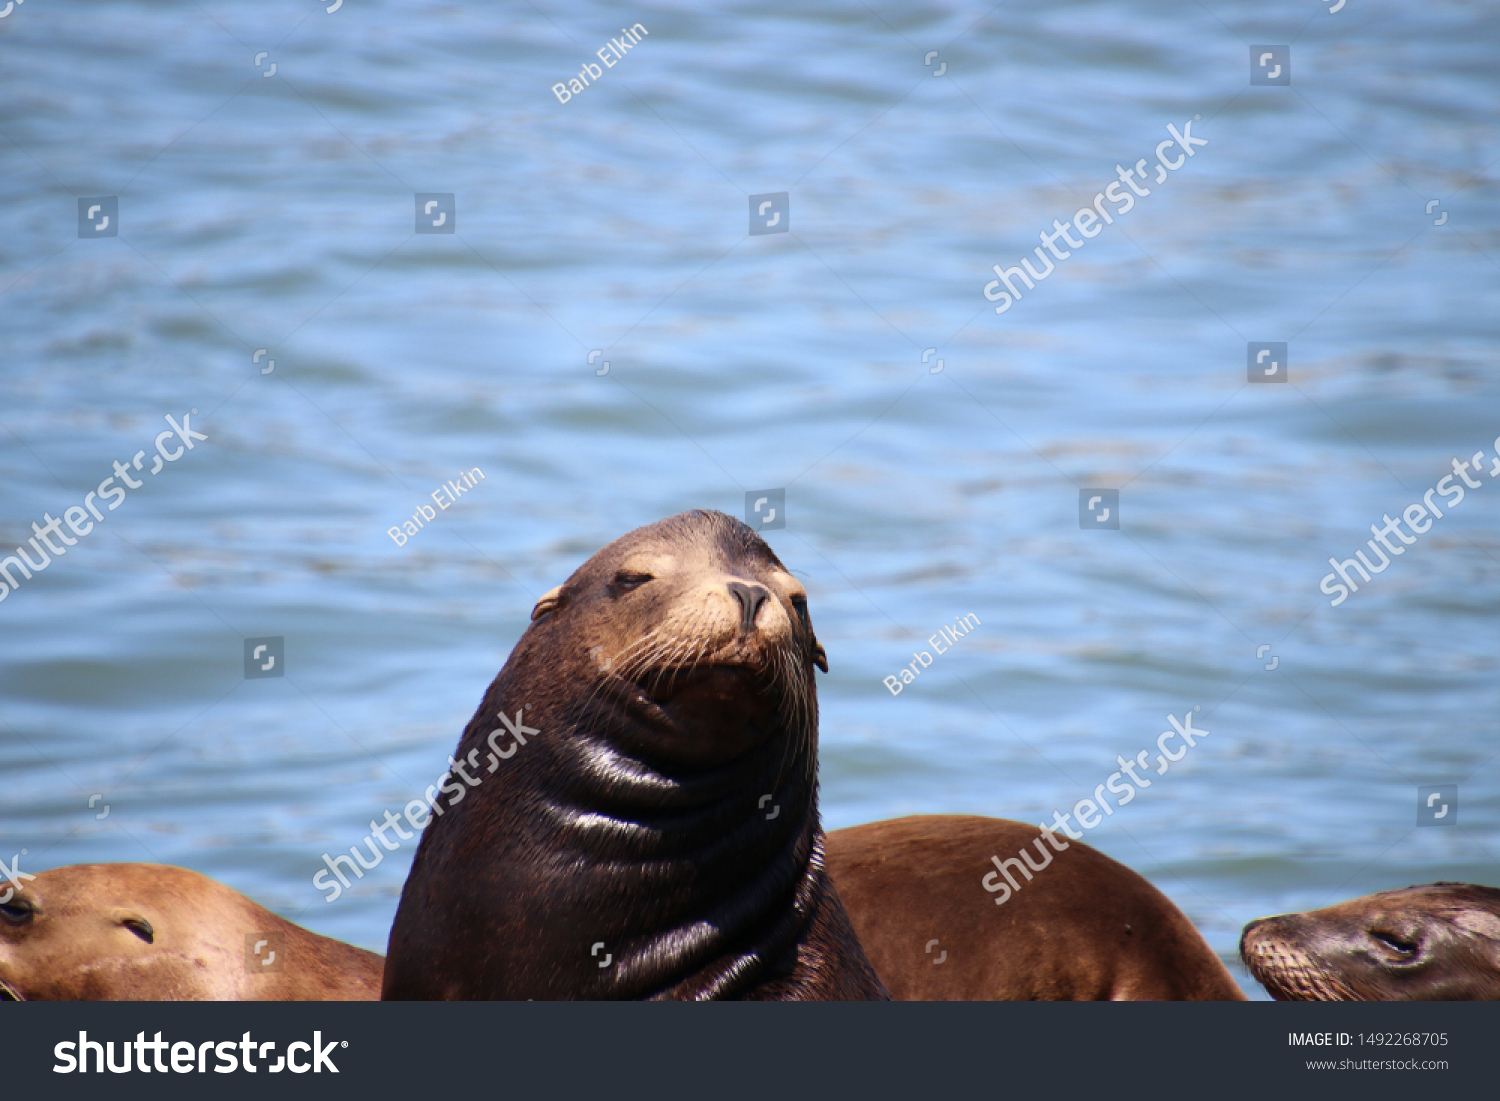 Sea lion mammals with brown fur on pier in blue water on bright sunny day.  #1492268705